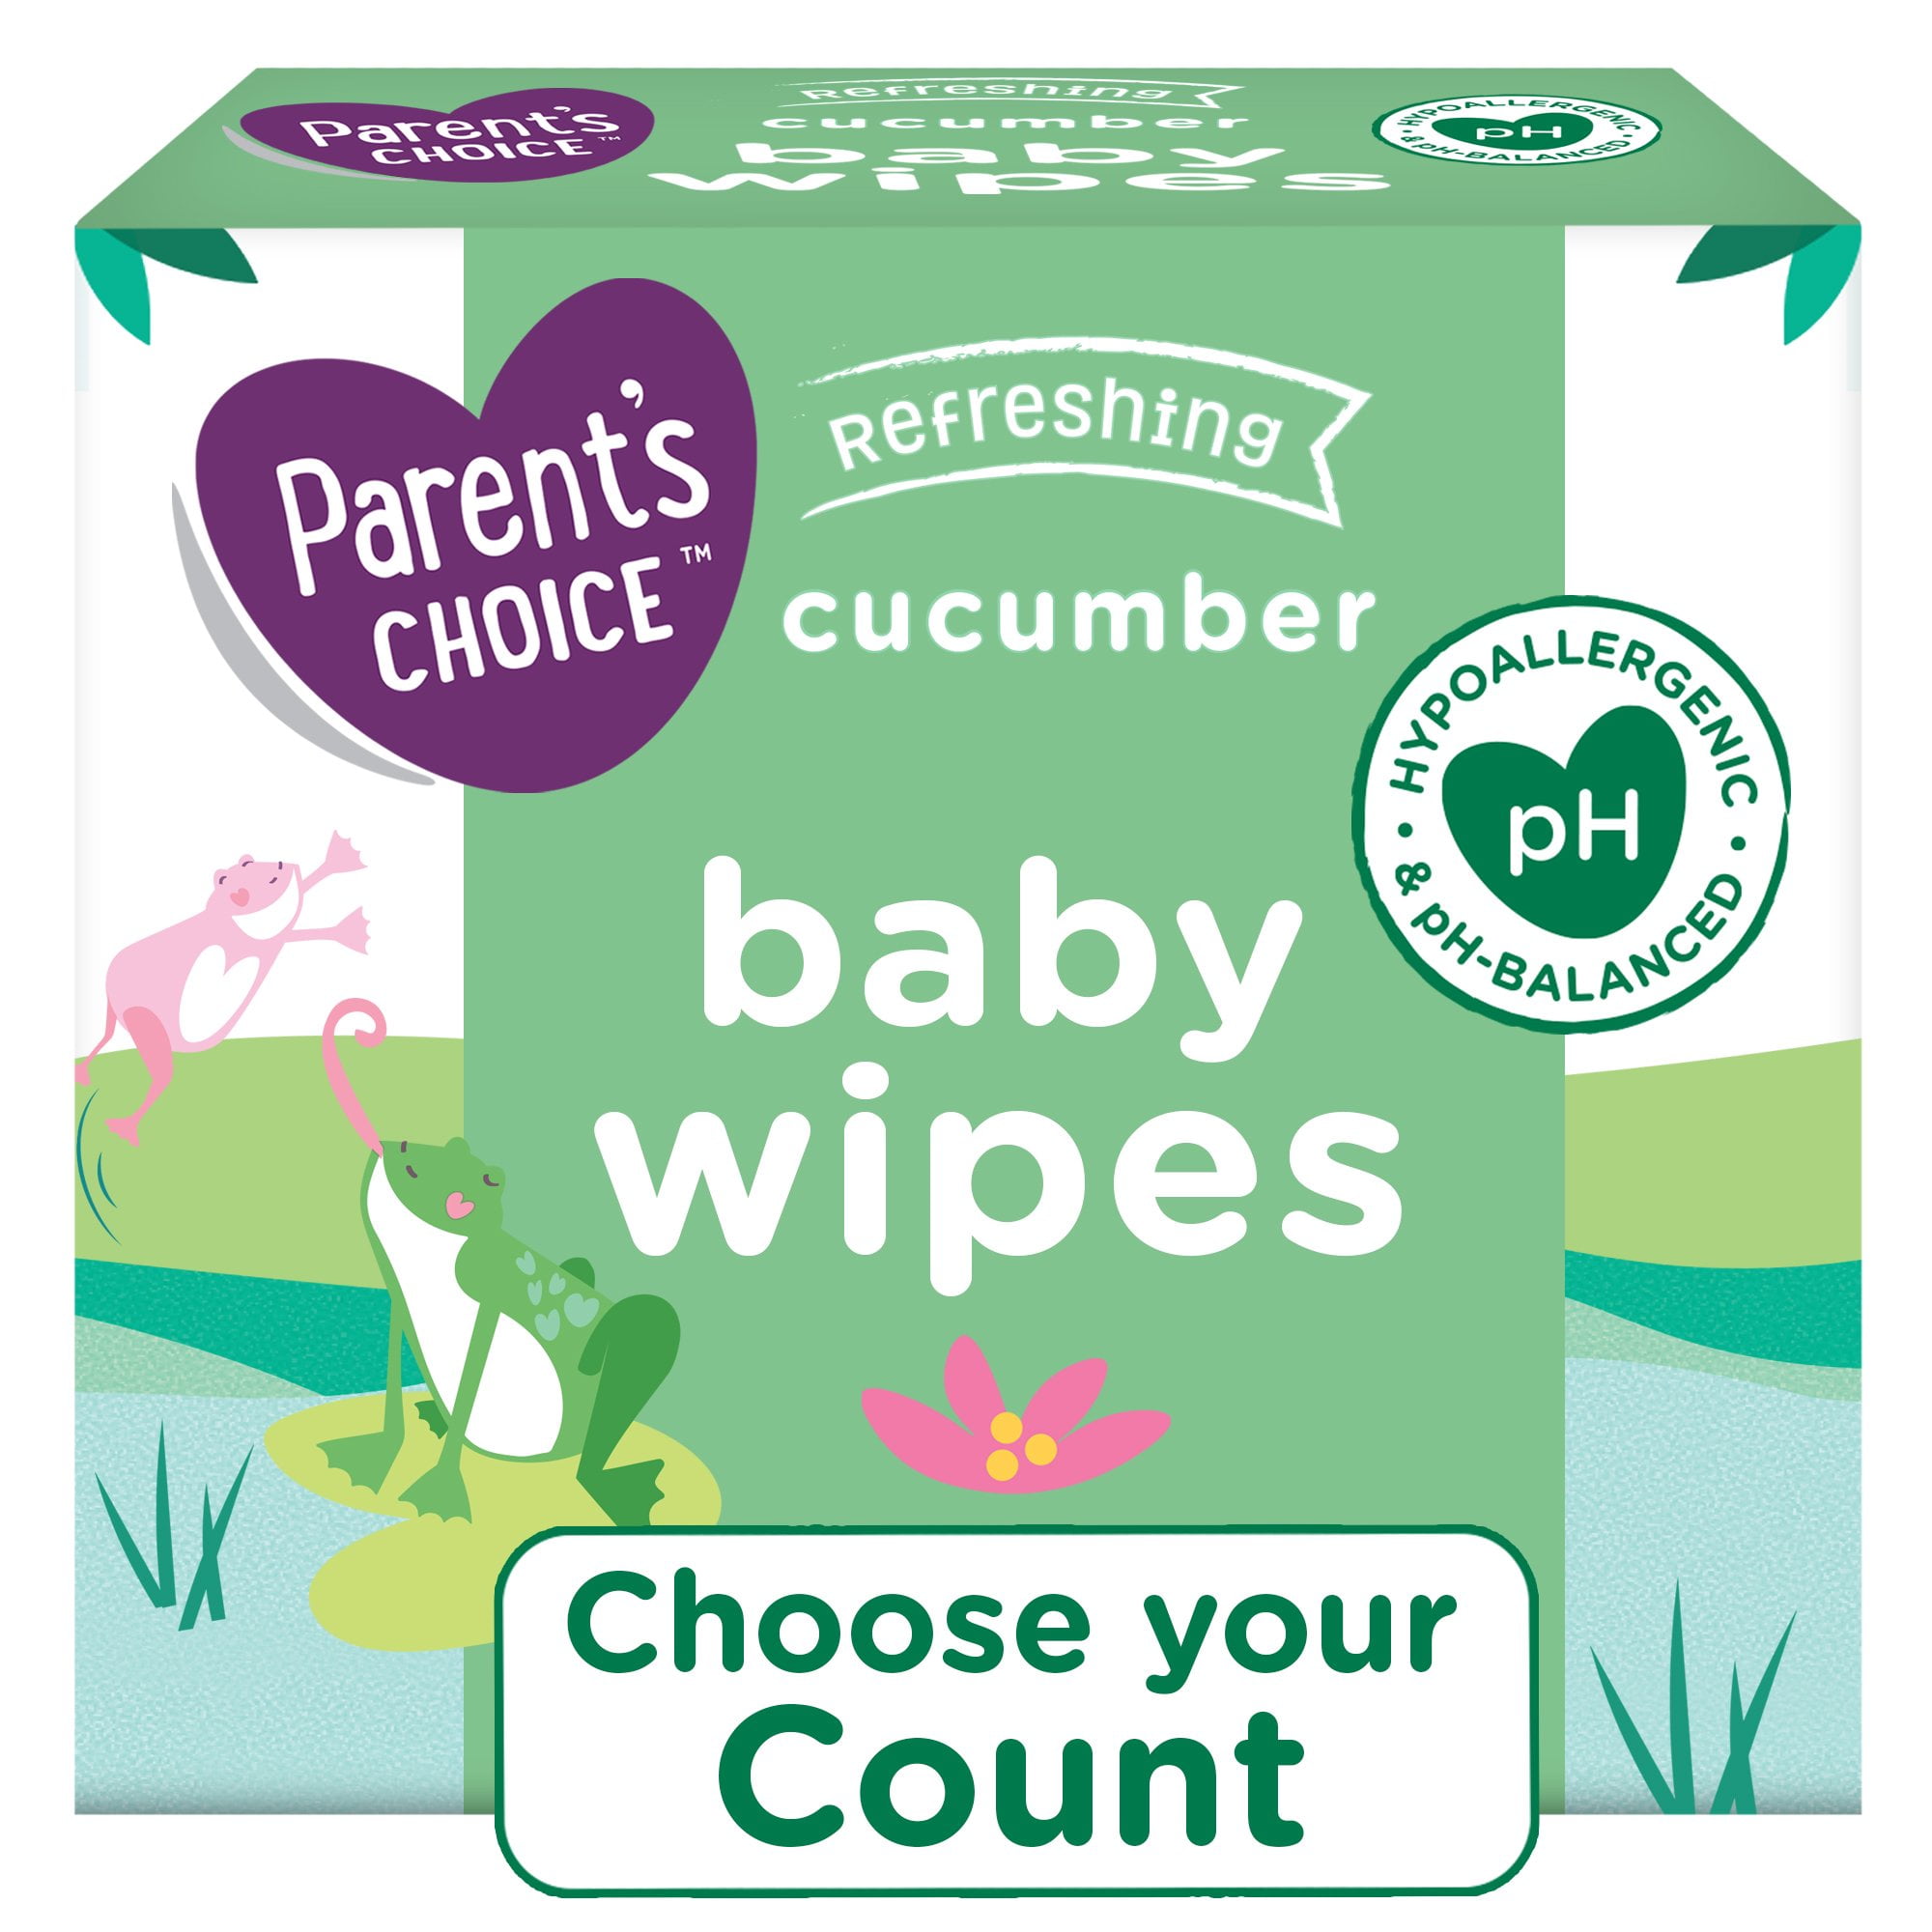 Parent's Choice Cucumber Scent Baby Wipes (Choose Your Count)